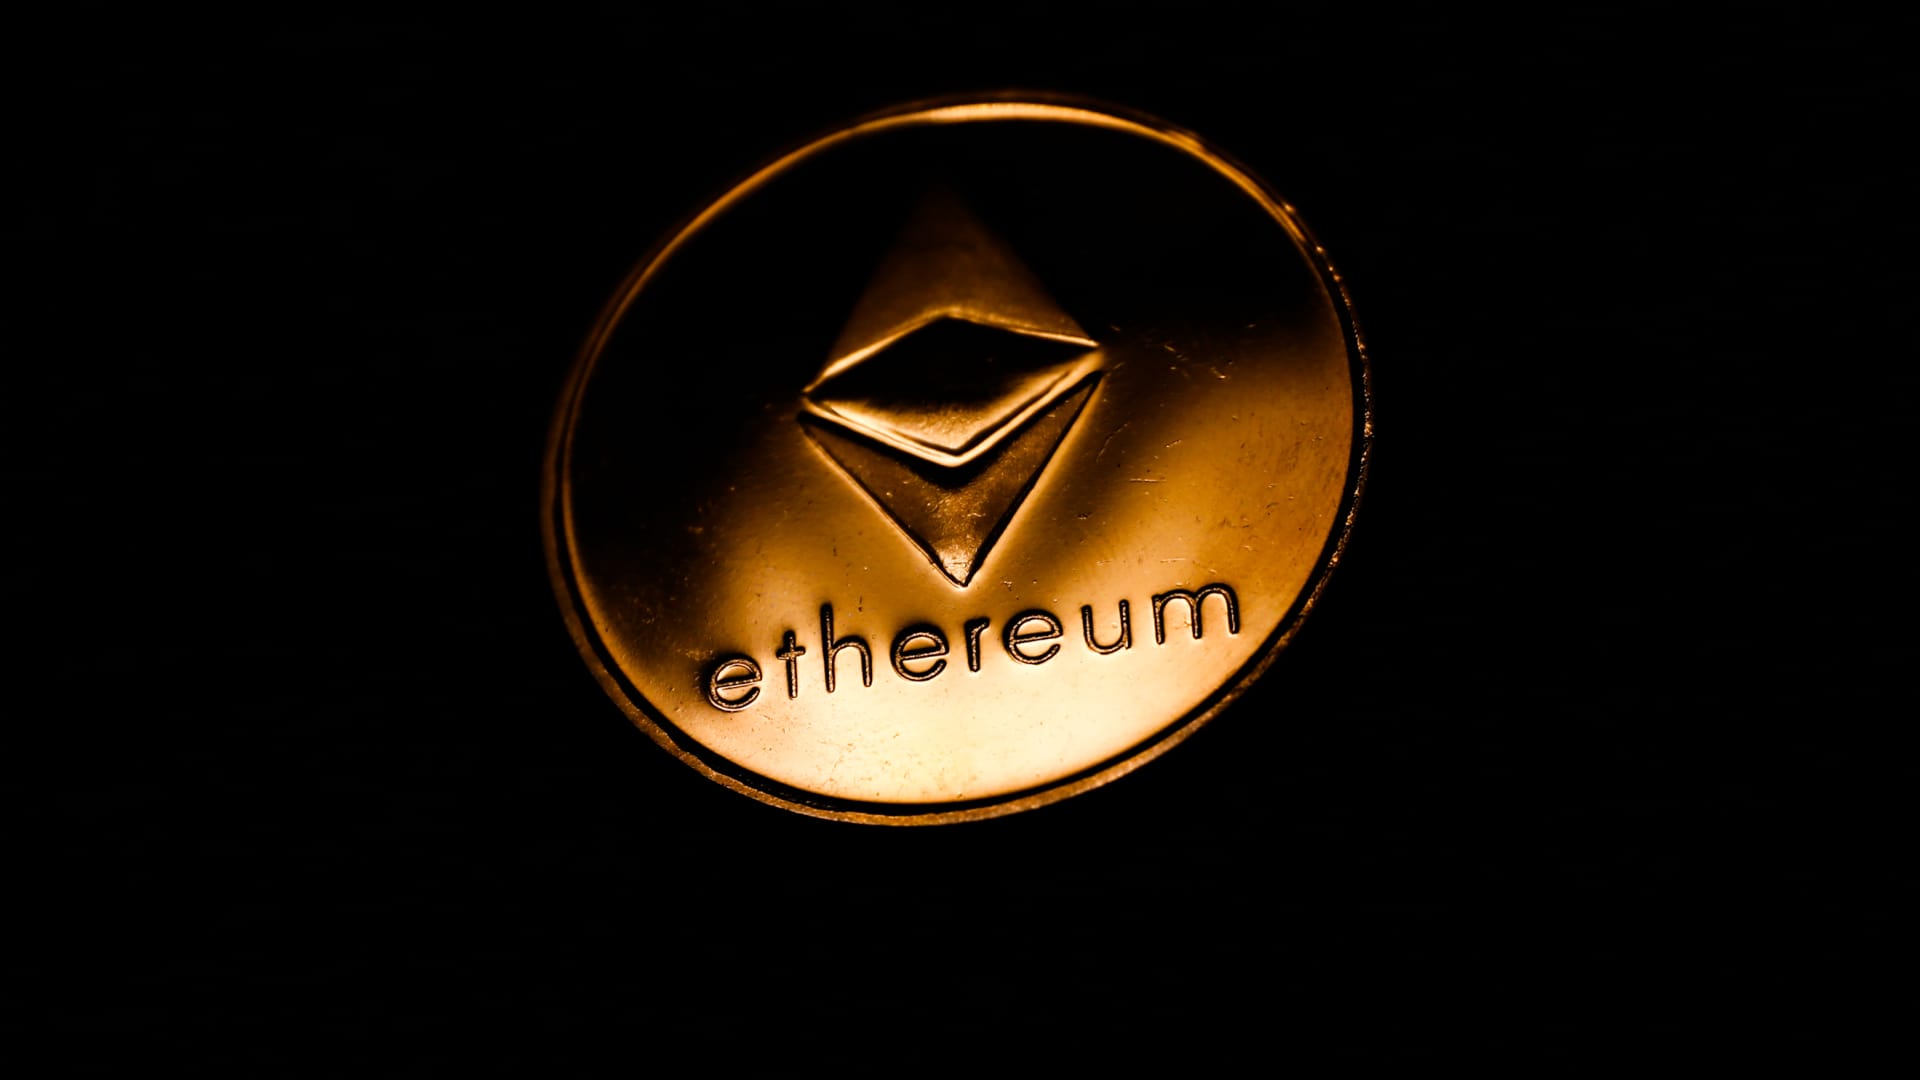 Ether (ETH) drops 15% since Ethereum merge as traders take profits